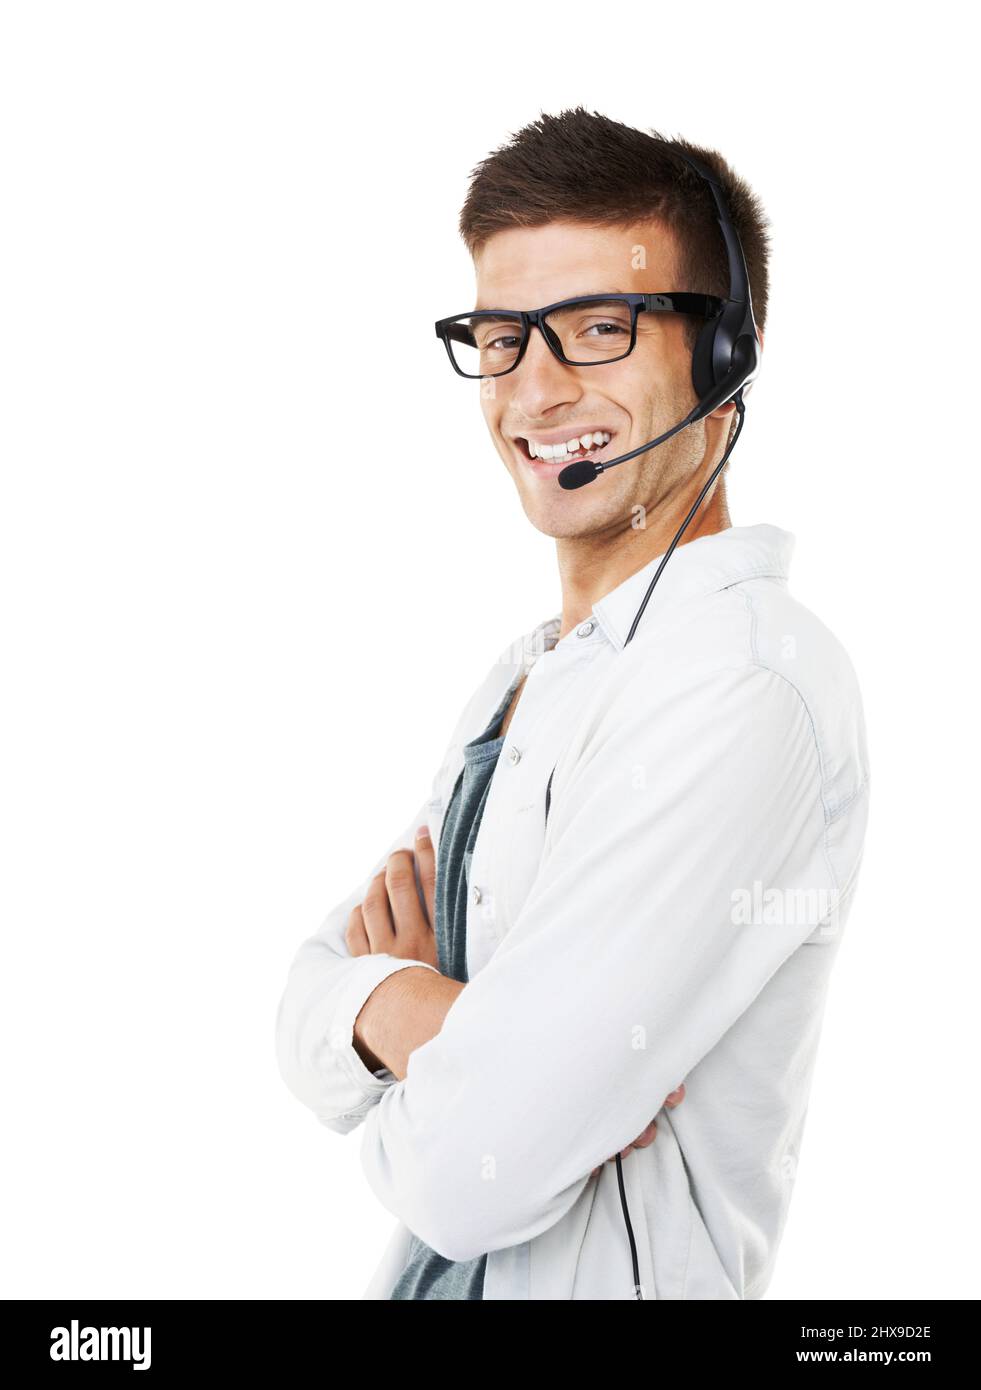 Guess whos on the line. Portrait of a smiling hipster man with a headset on and his arms crossed. Stock Photo